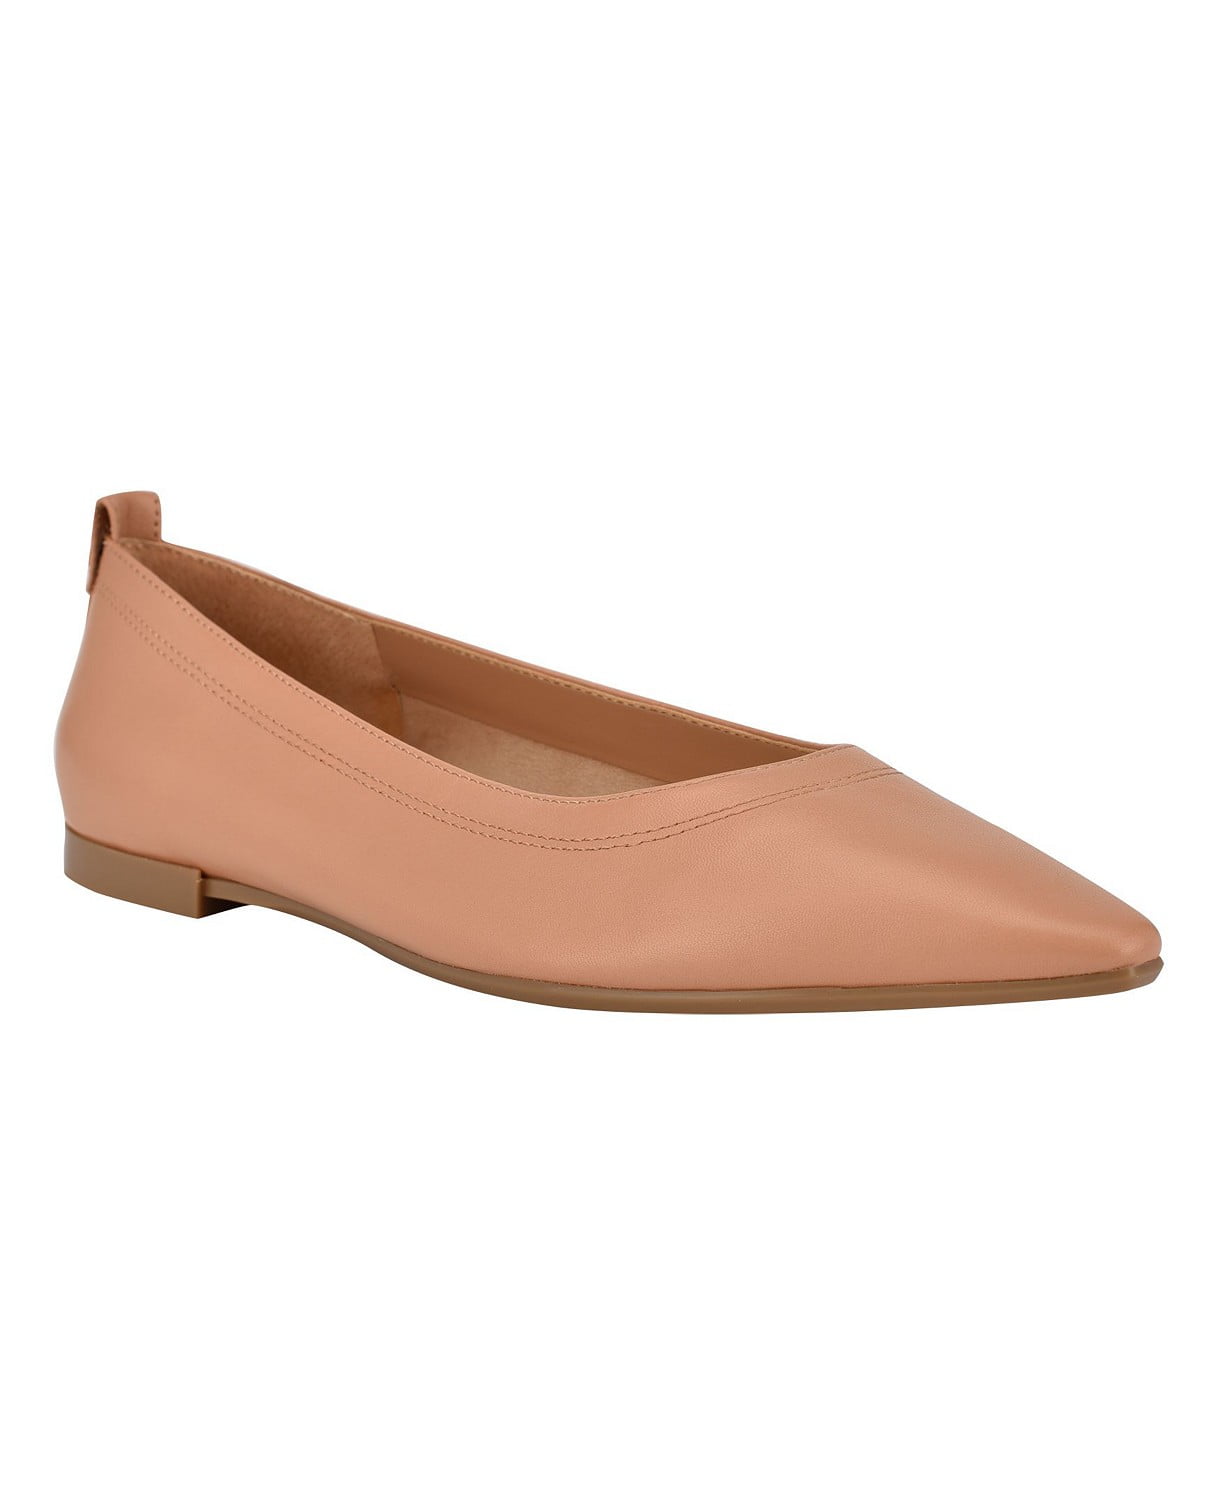 www.couturepoint.com-calvin-klein-womens-brown-leather-raya-dressy-ballet-flats